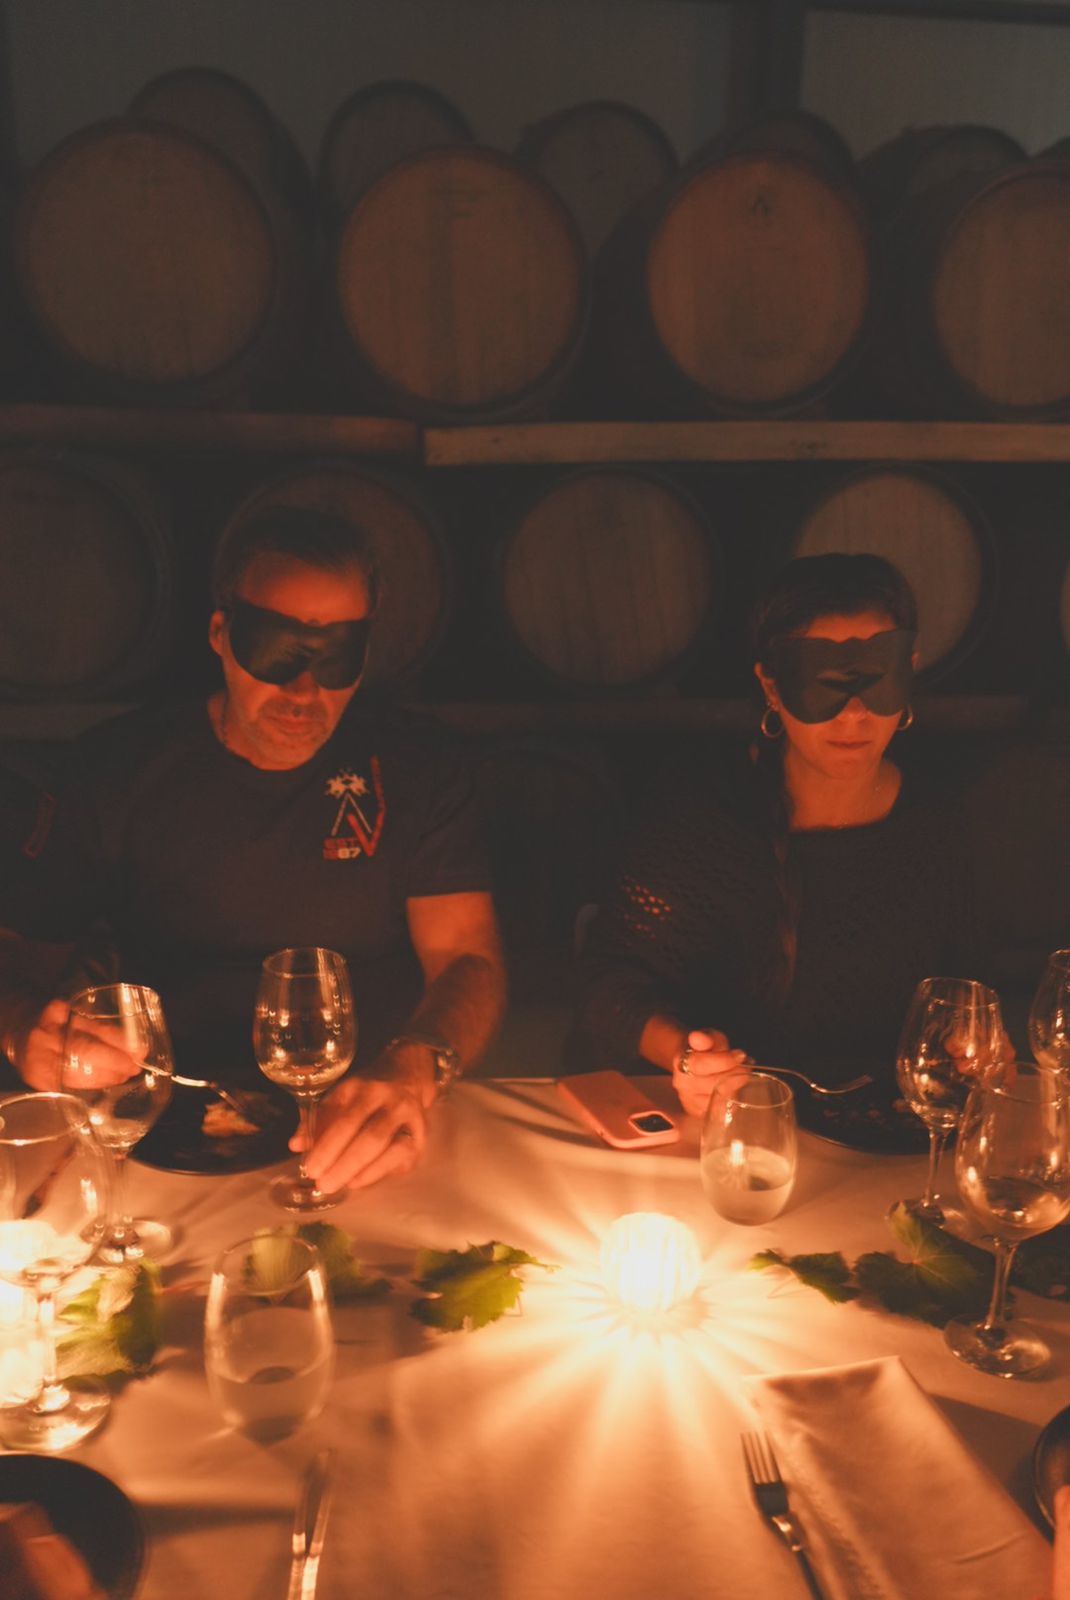 BLIND DINNER, A REDISCOVERY JOURNEY